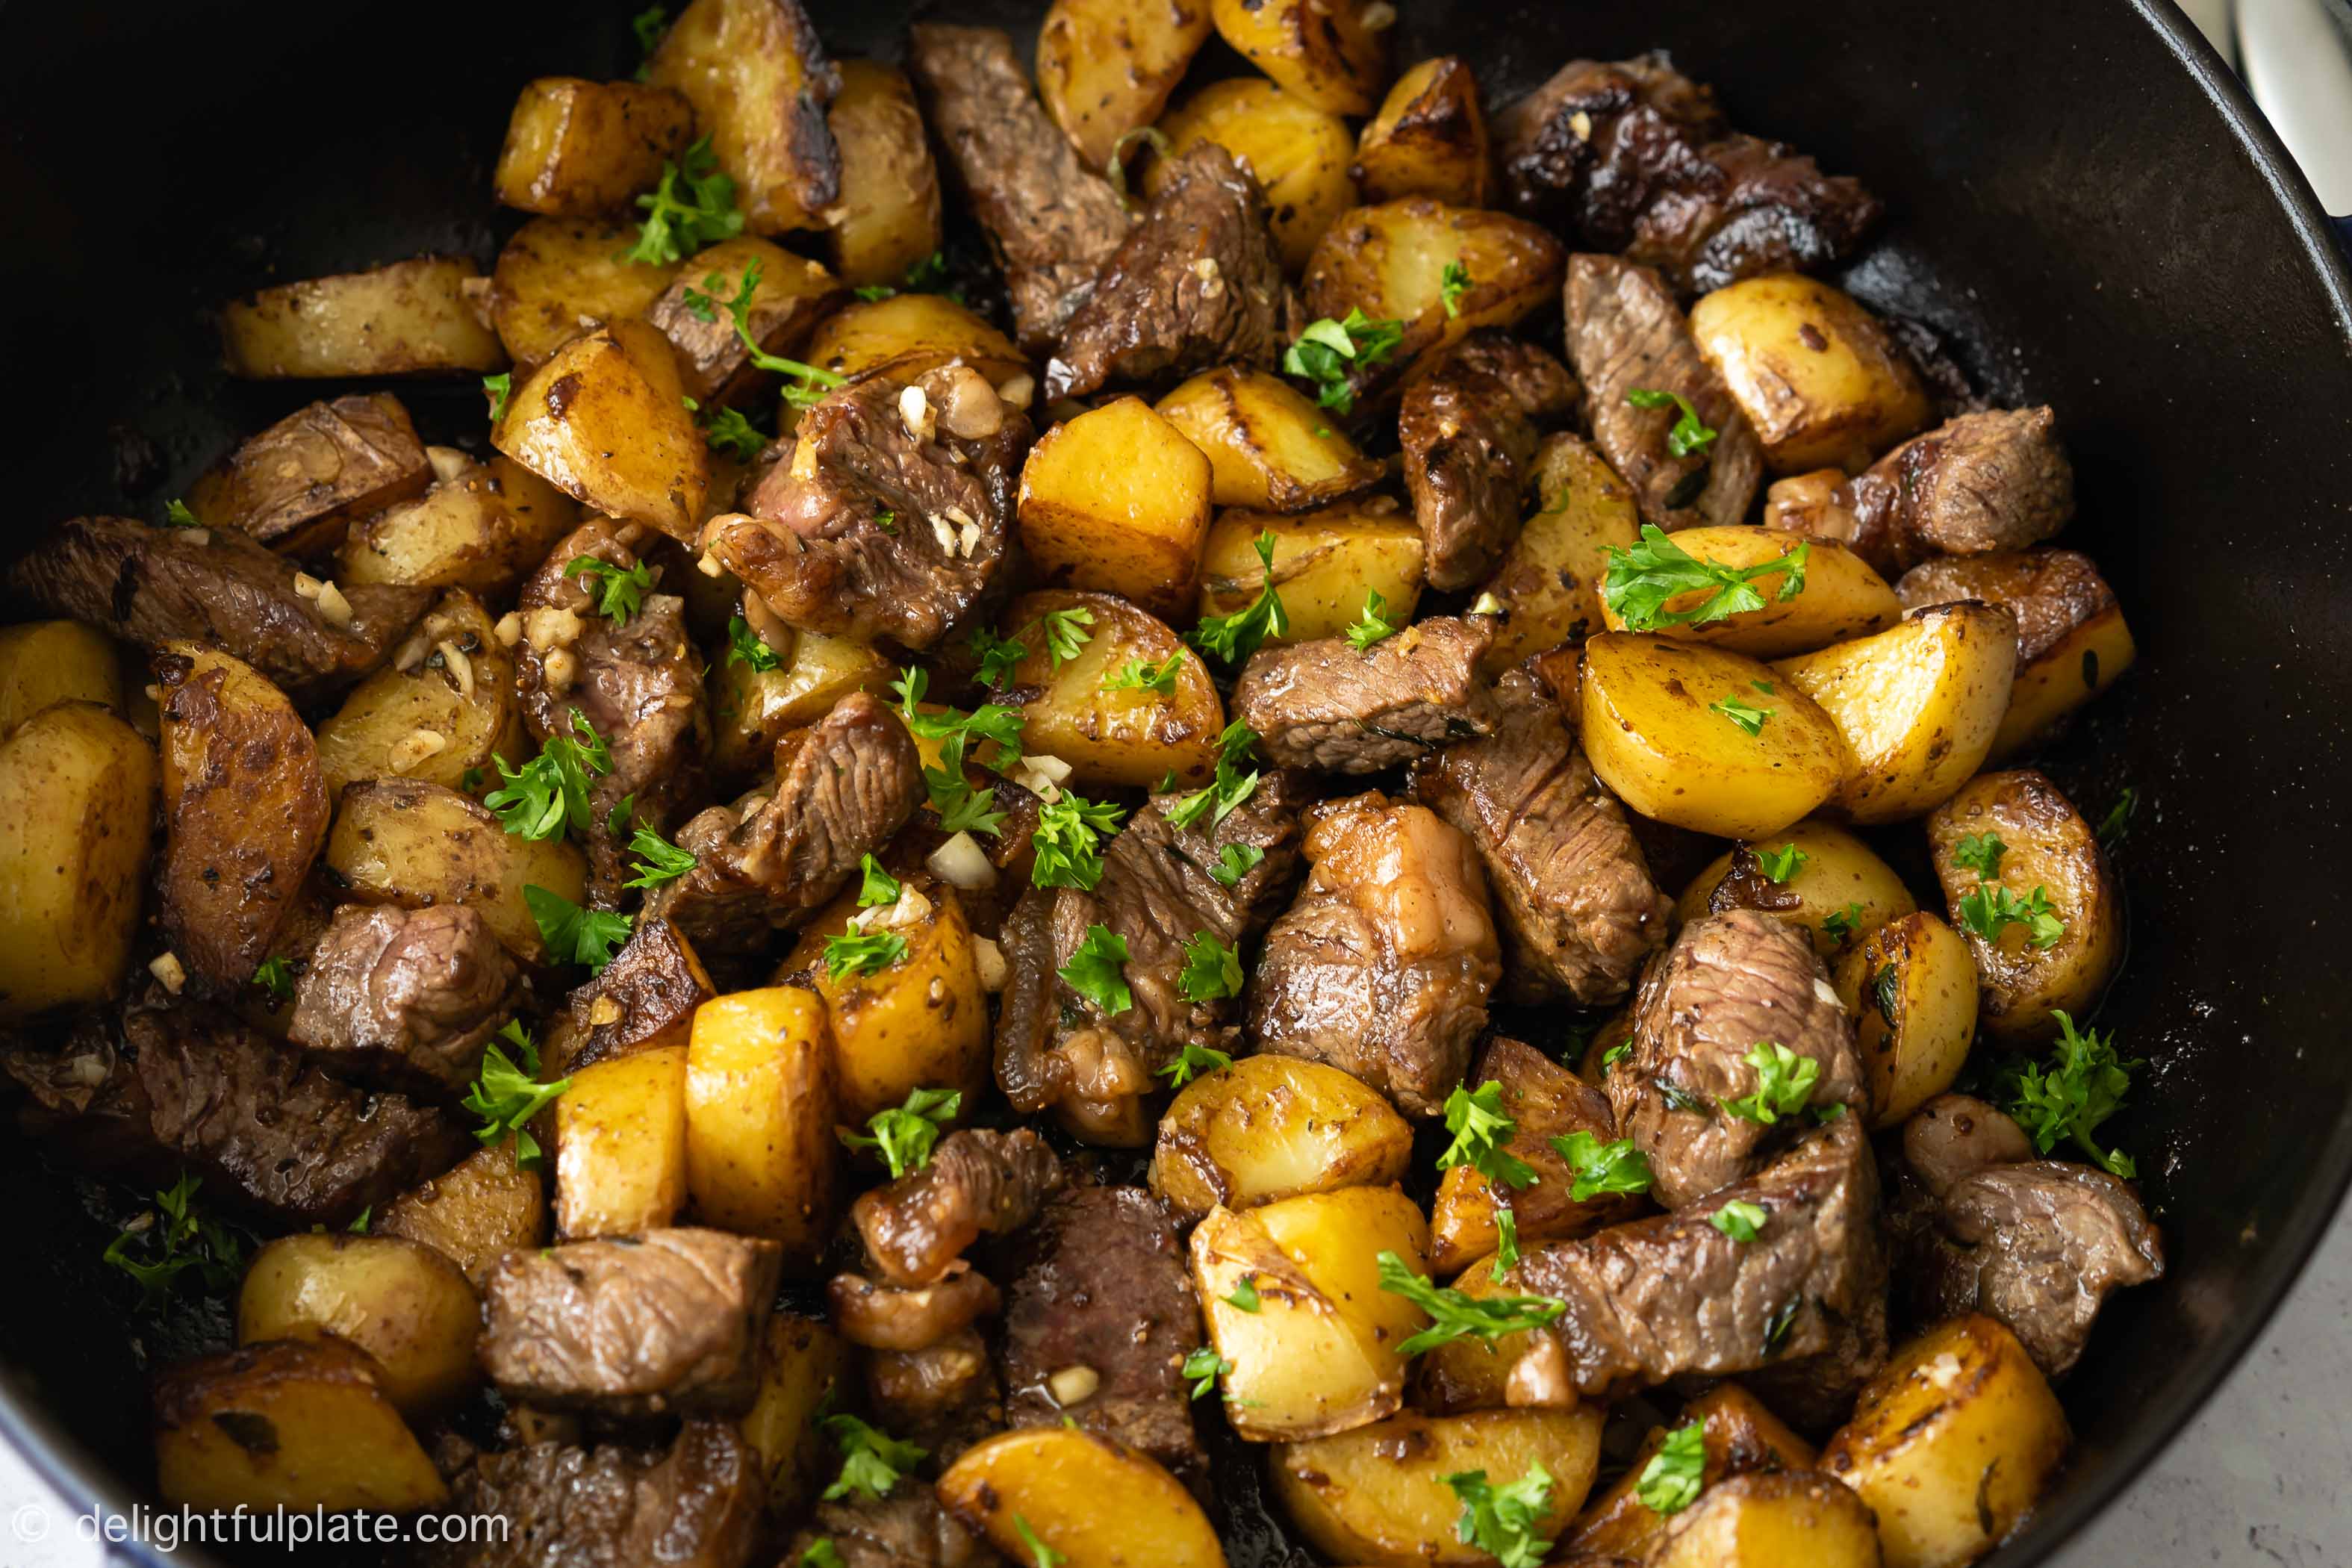 This Asian Steak Bites and Potatoes is an quick and easy one-pan weeknight dinner. It features beef cubes and tender potatoes with a buttery savory sauce.